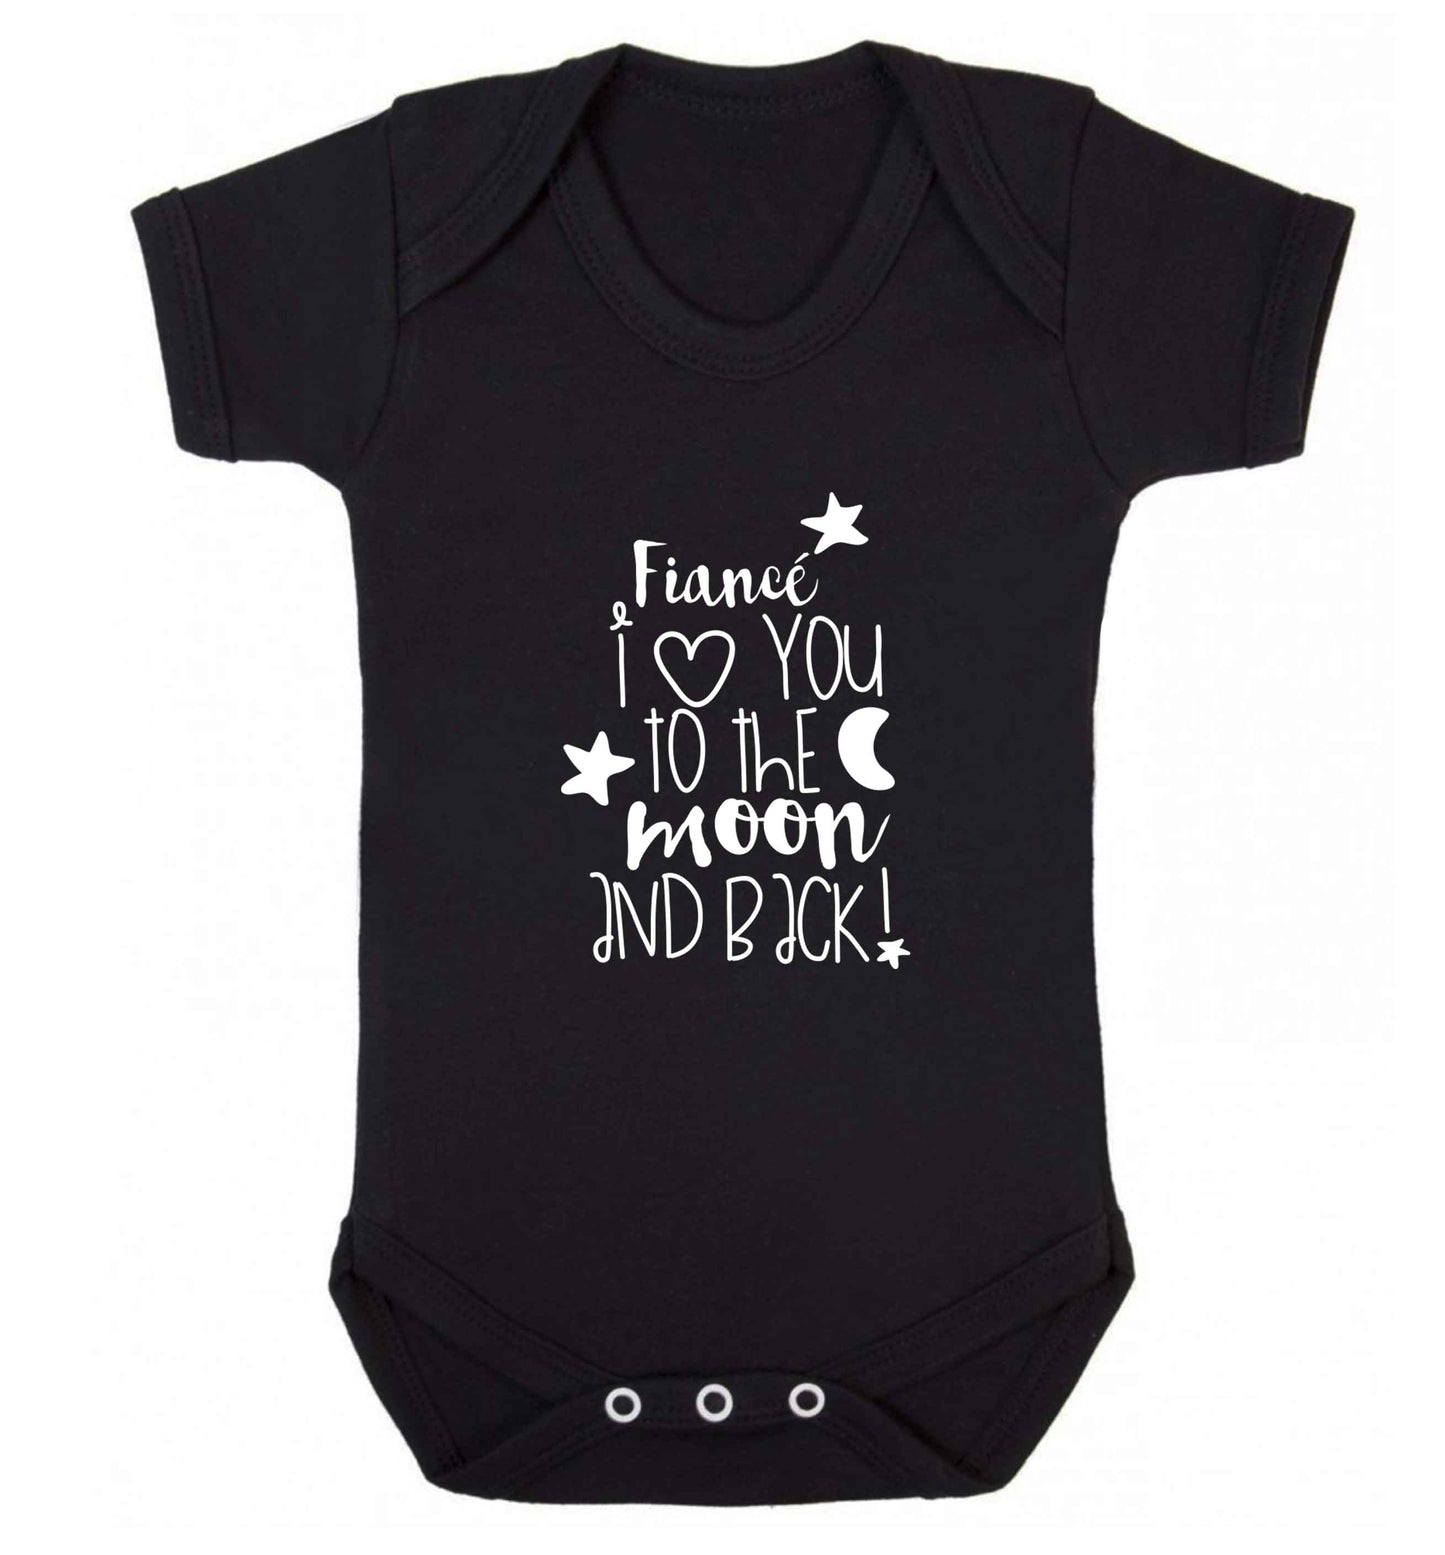 Fianc√© I love you to the moon and back baby vest black 18-24 months